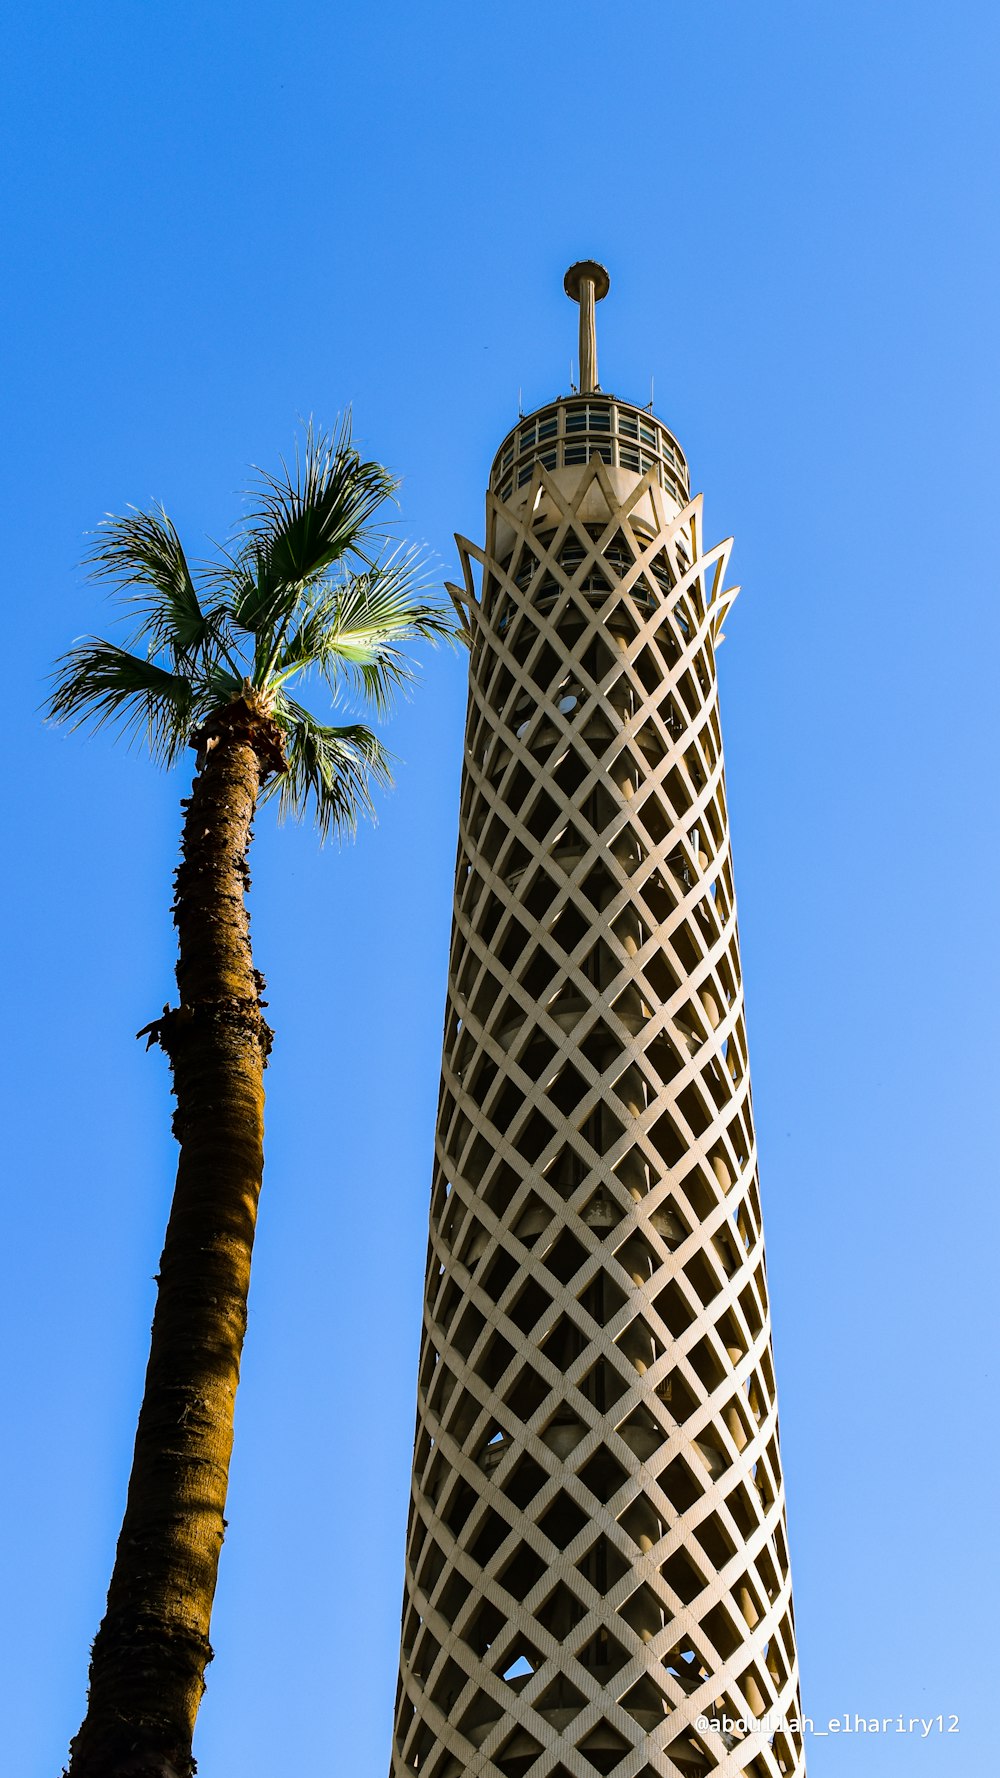 green palm tree near white and black tower